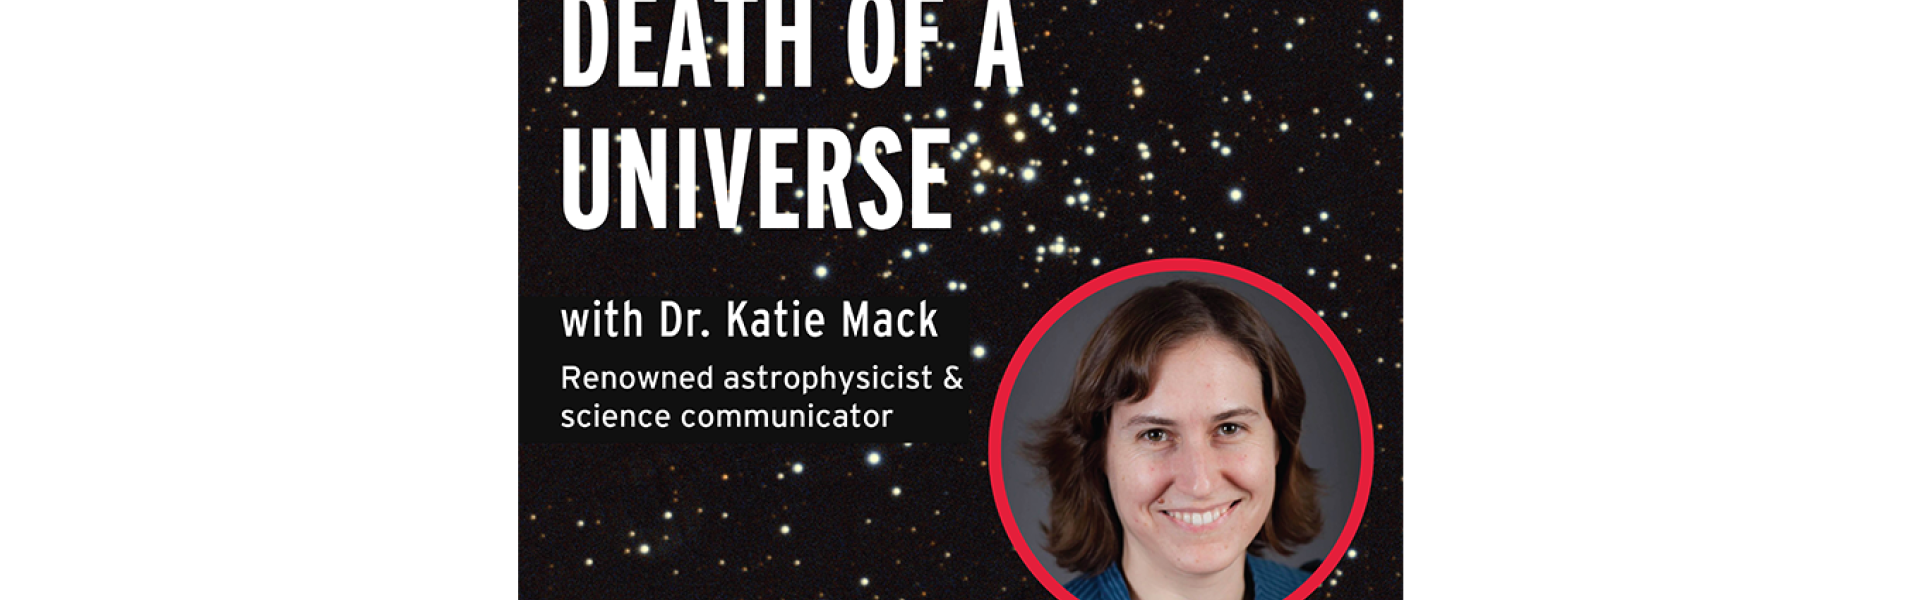 The Death of a Universe by Dr. Katie Mack